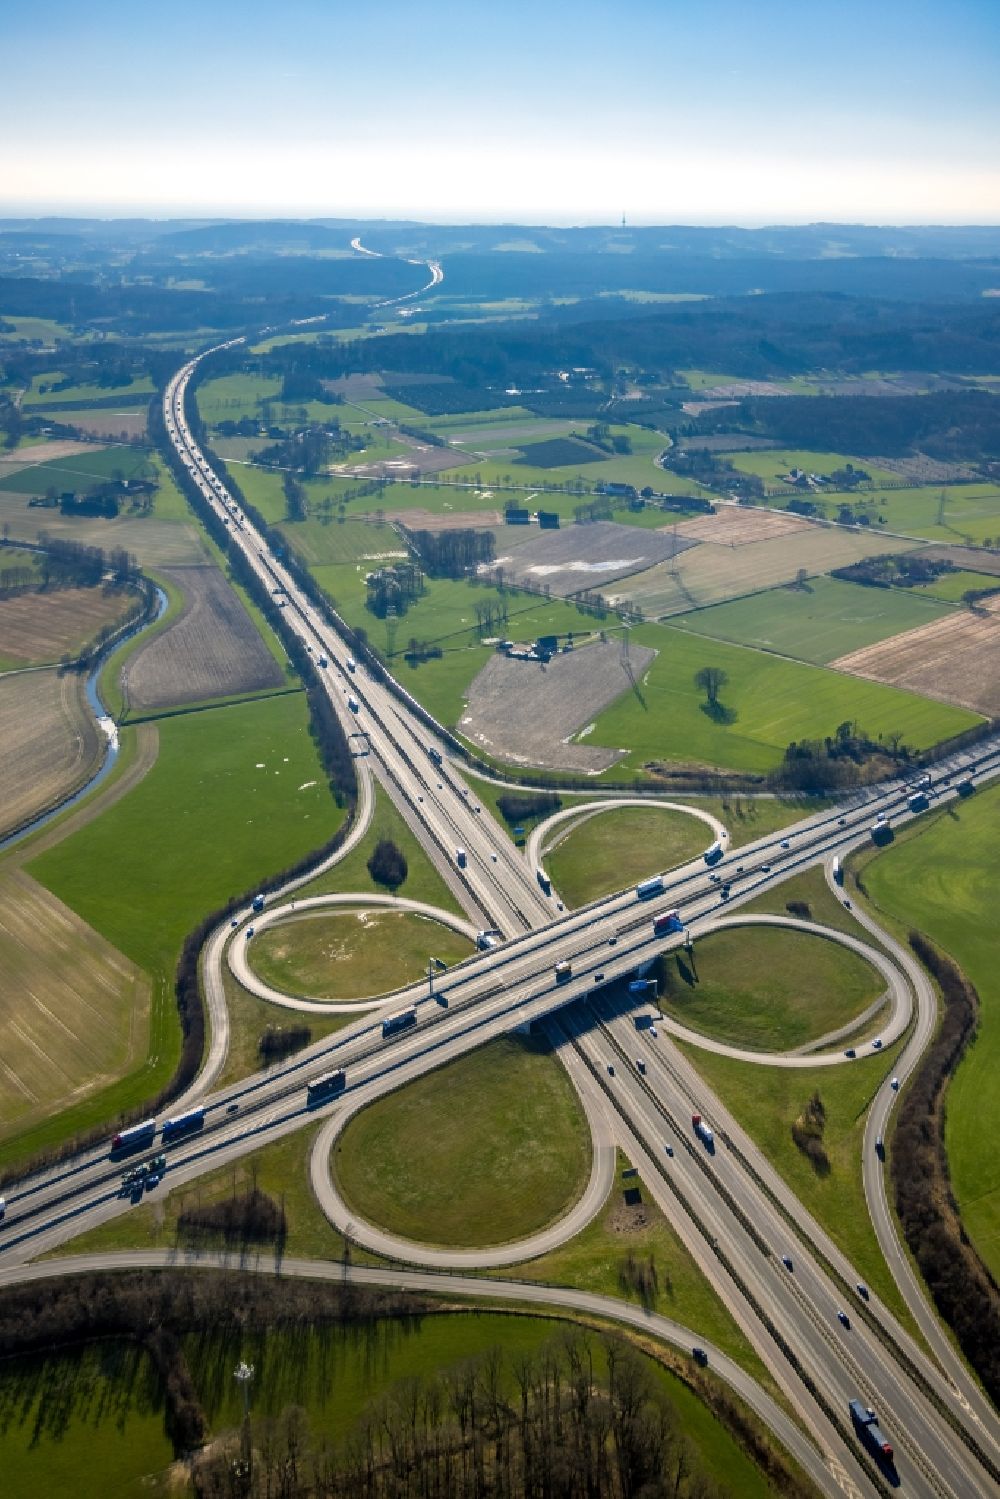 Aerial image Lotte - Traffic flow at the intersection- motorway A30 - A1 Kreuz Lotte/Osnabrueck in form of cloverleaf in Lotte in the state North Rhine-Westphalia, Germany